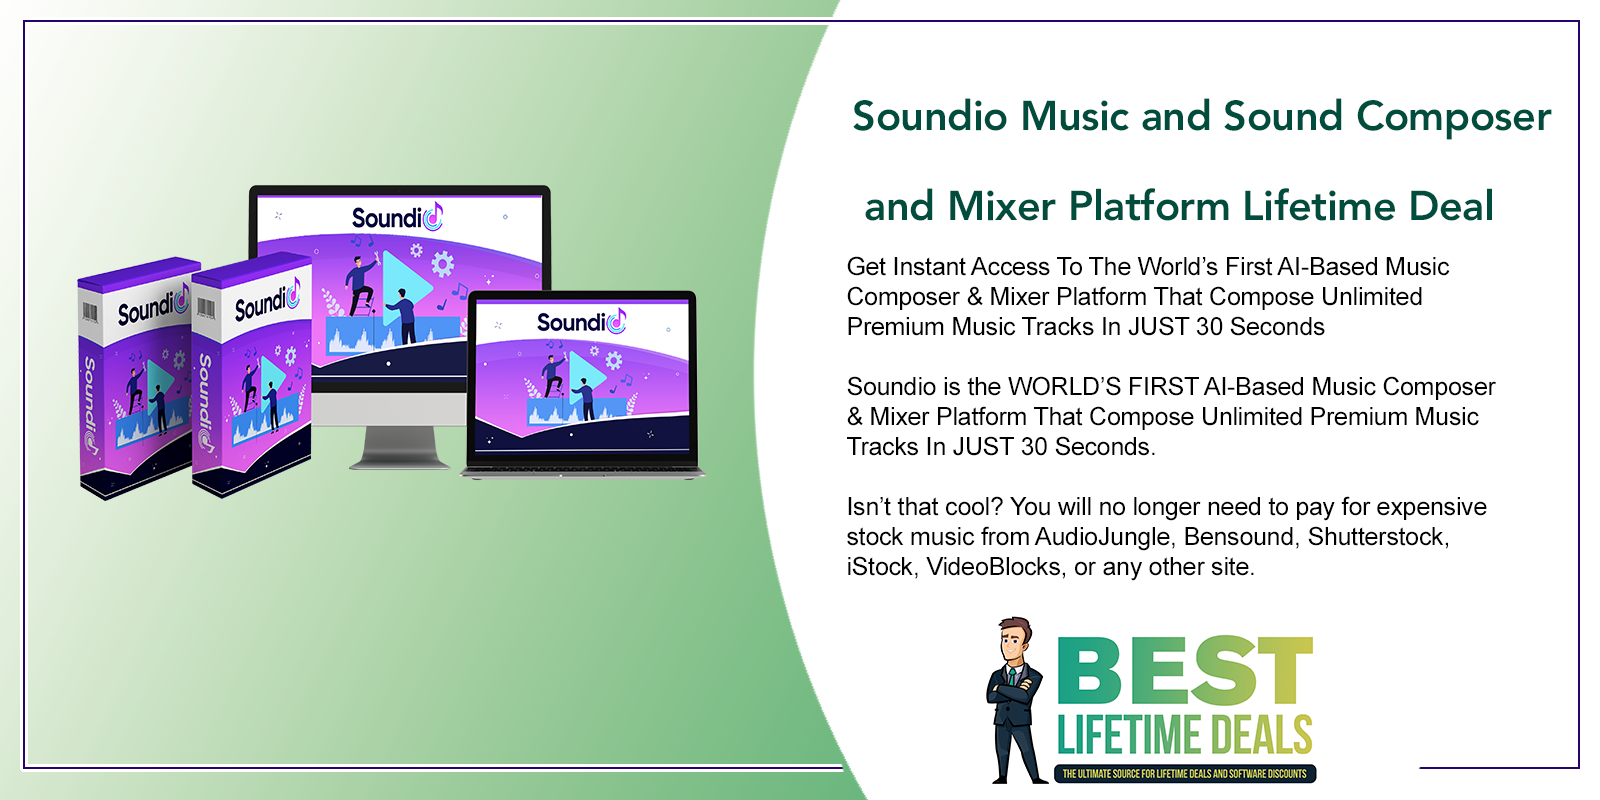 Soundio Music and Sound Composer and Mixer Platform Lifetime Deal Featured Image